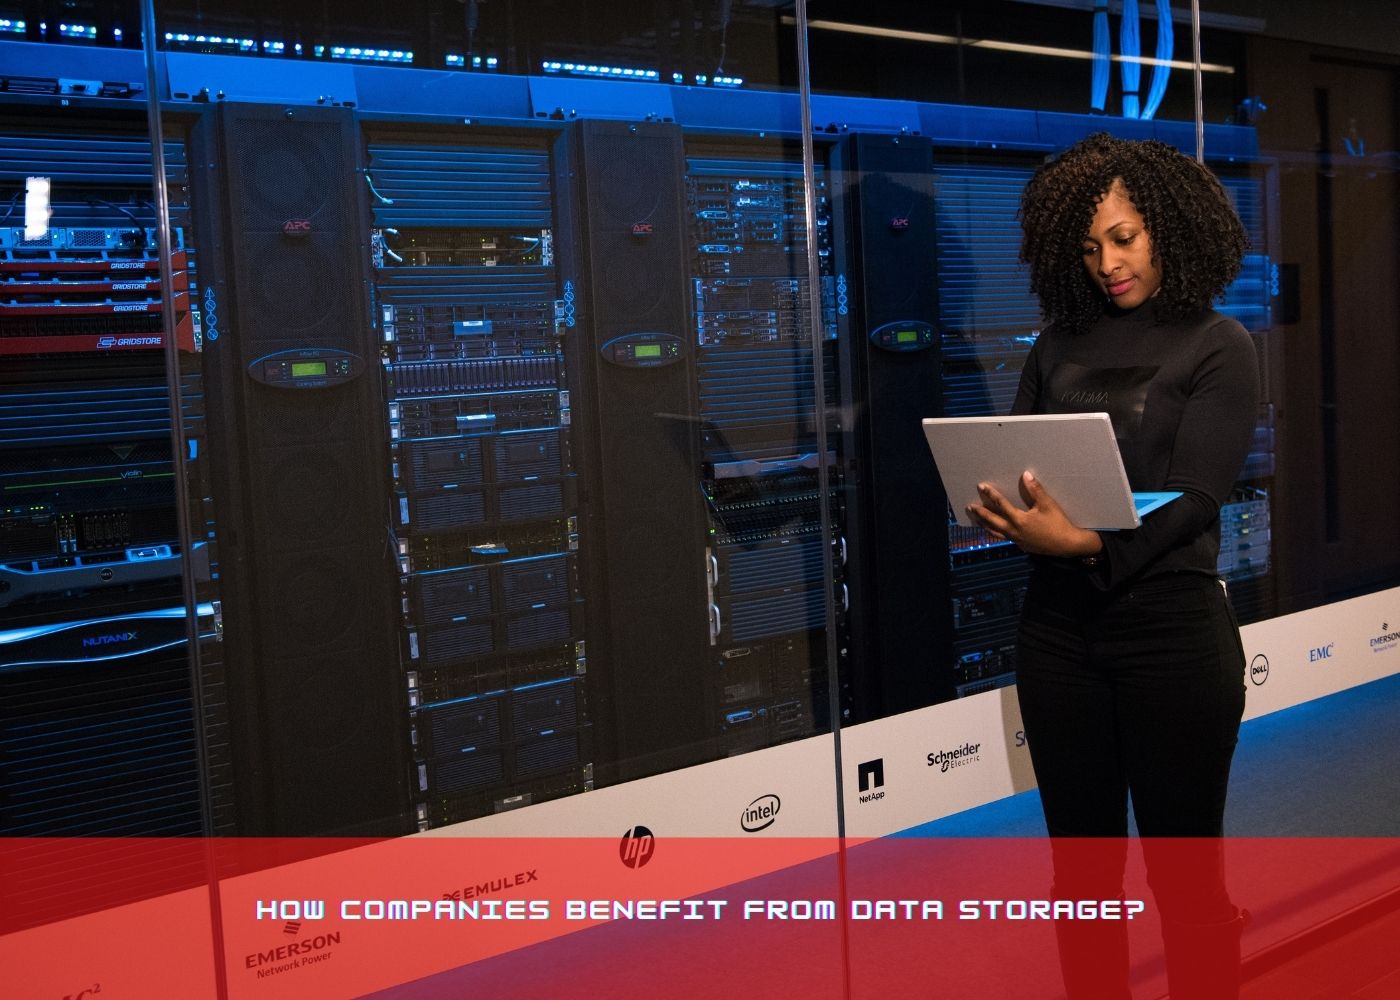 How companies benefit from data storage?